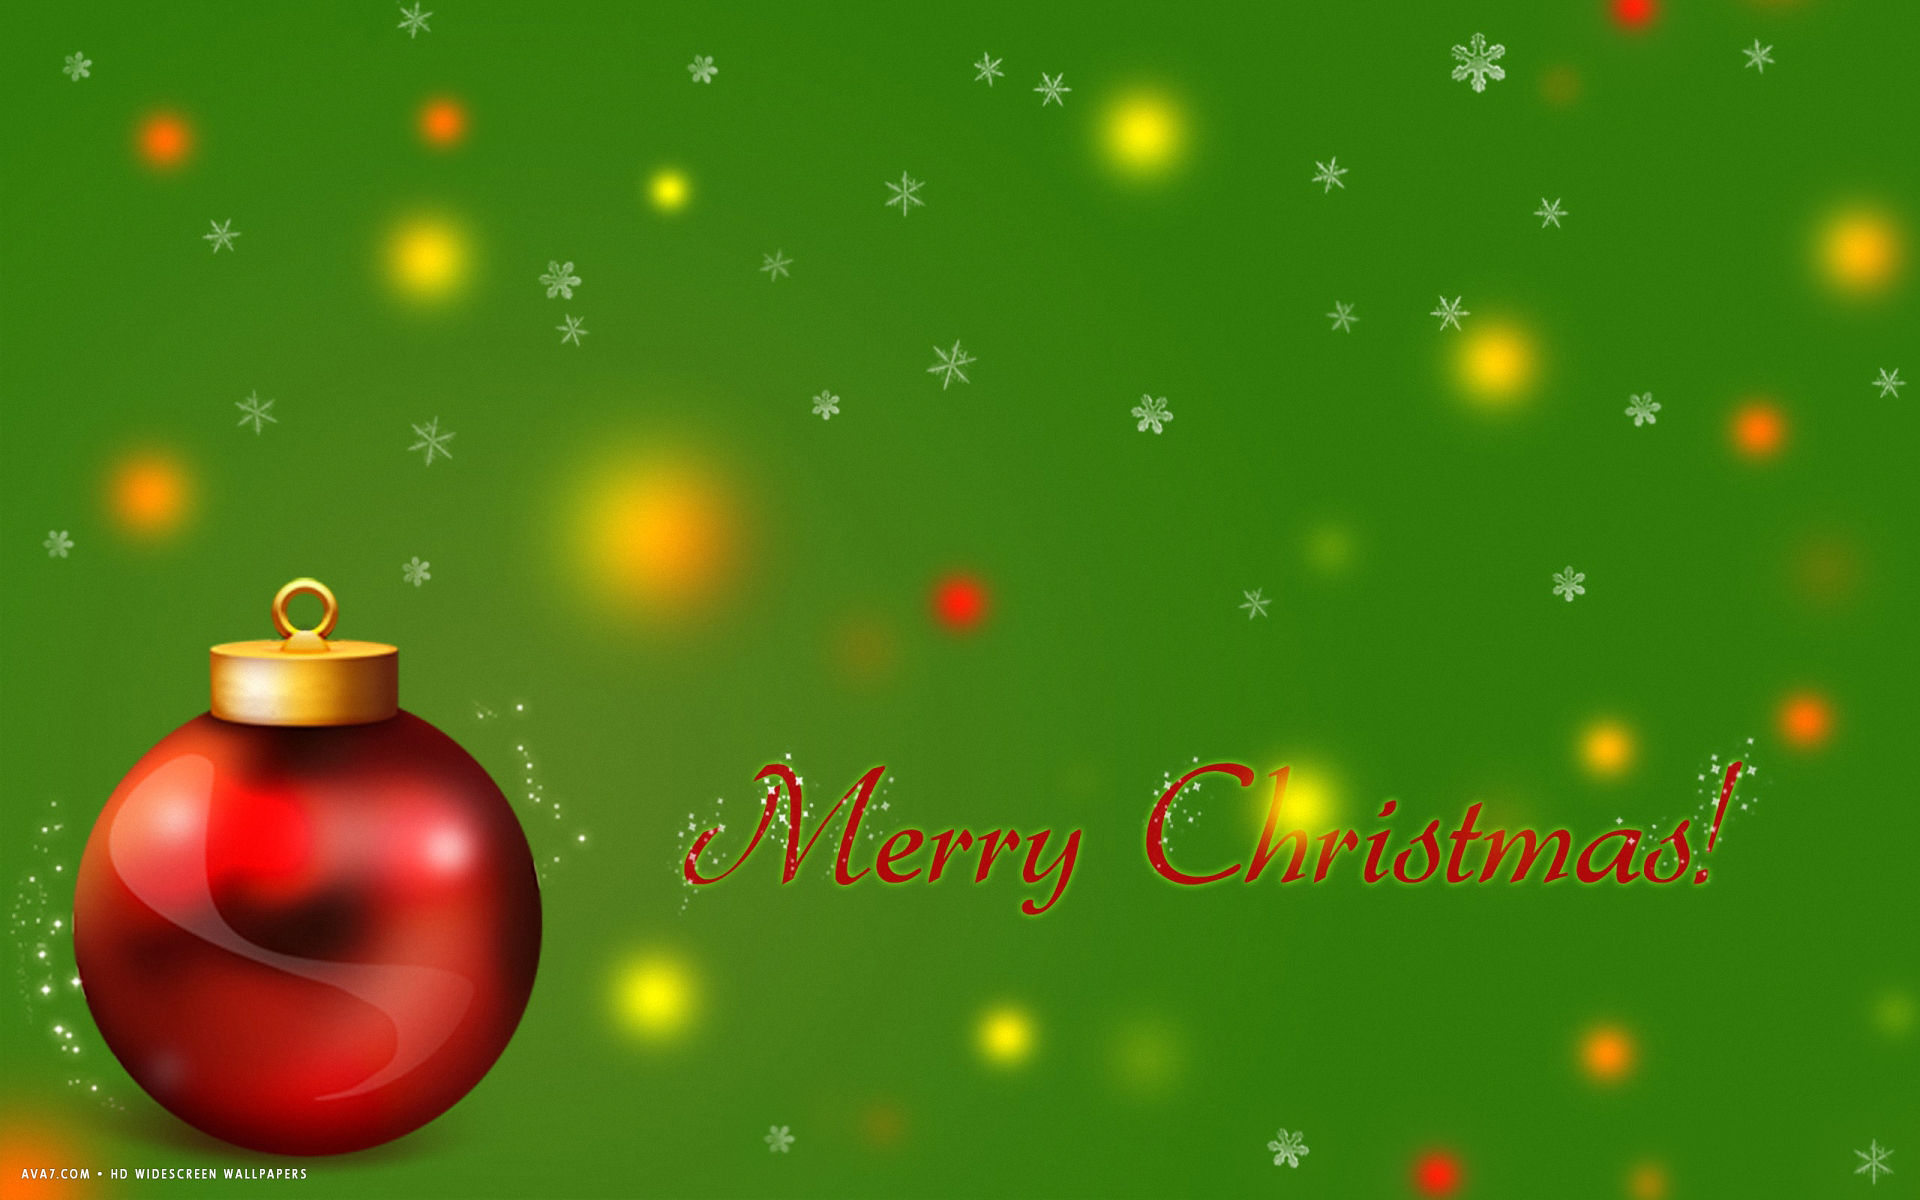 merry christmas red tree ball stars snowflakes green holiday hd widescreen wallpaper